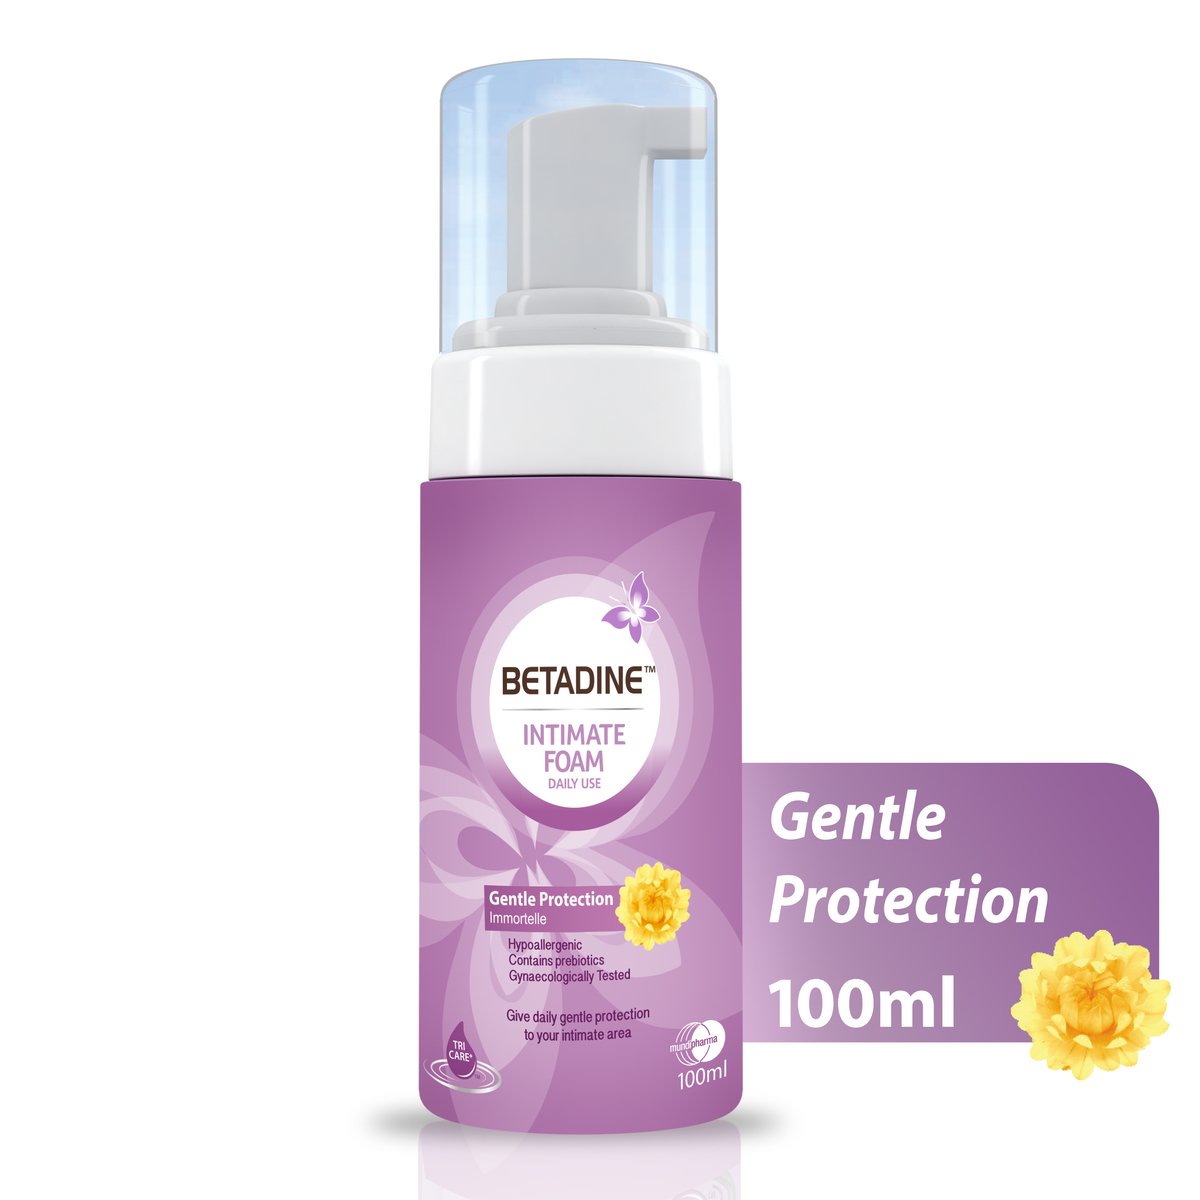 Betadine Intimate Foam with Gentle Protection 100ml